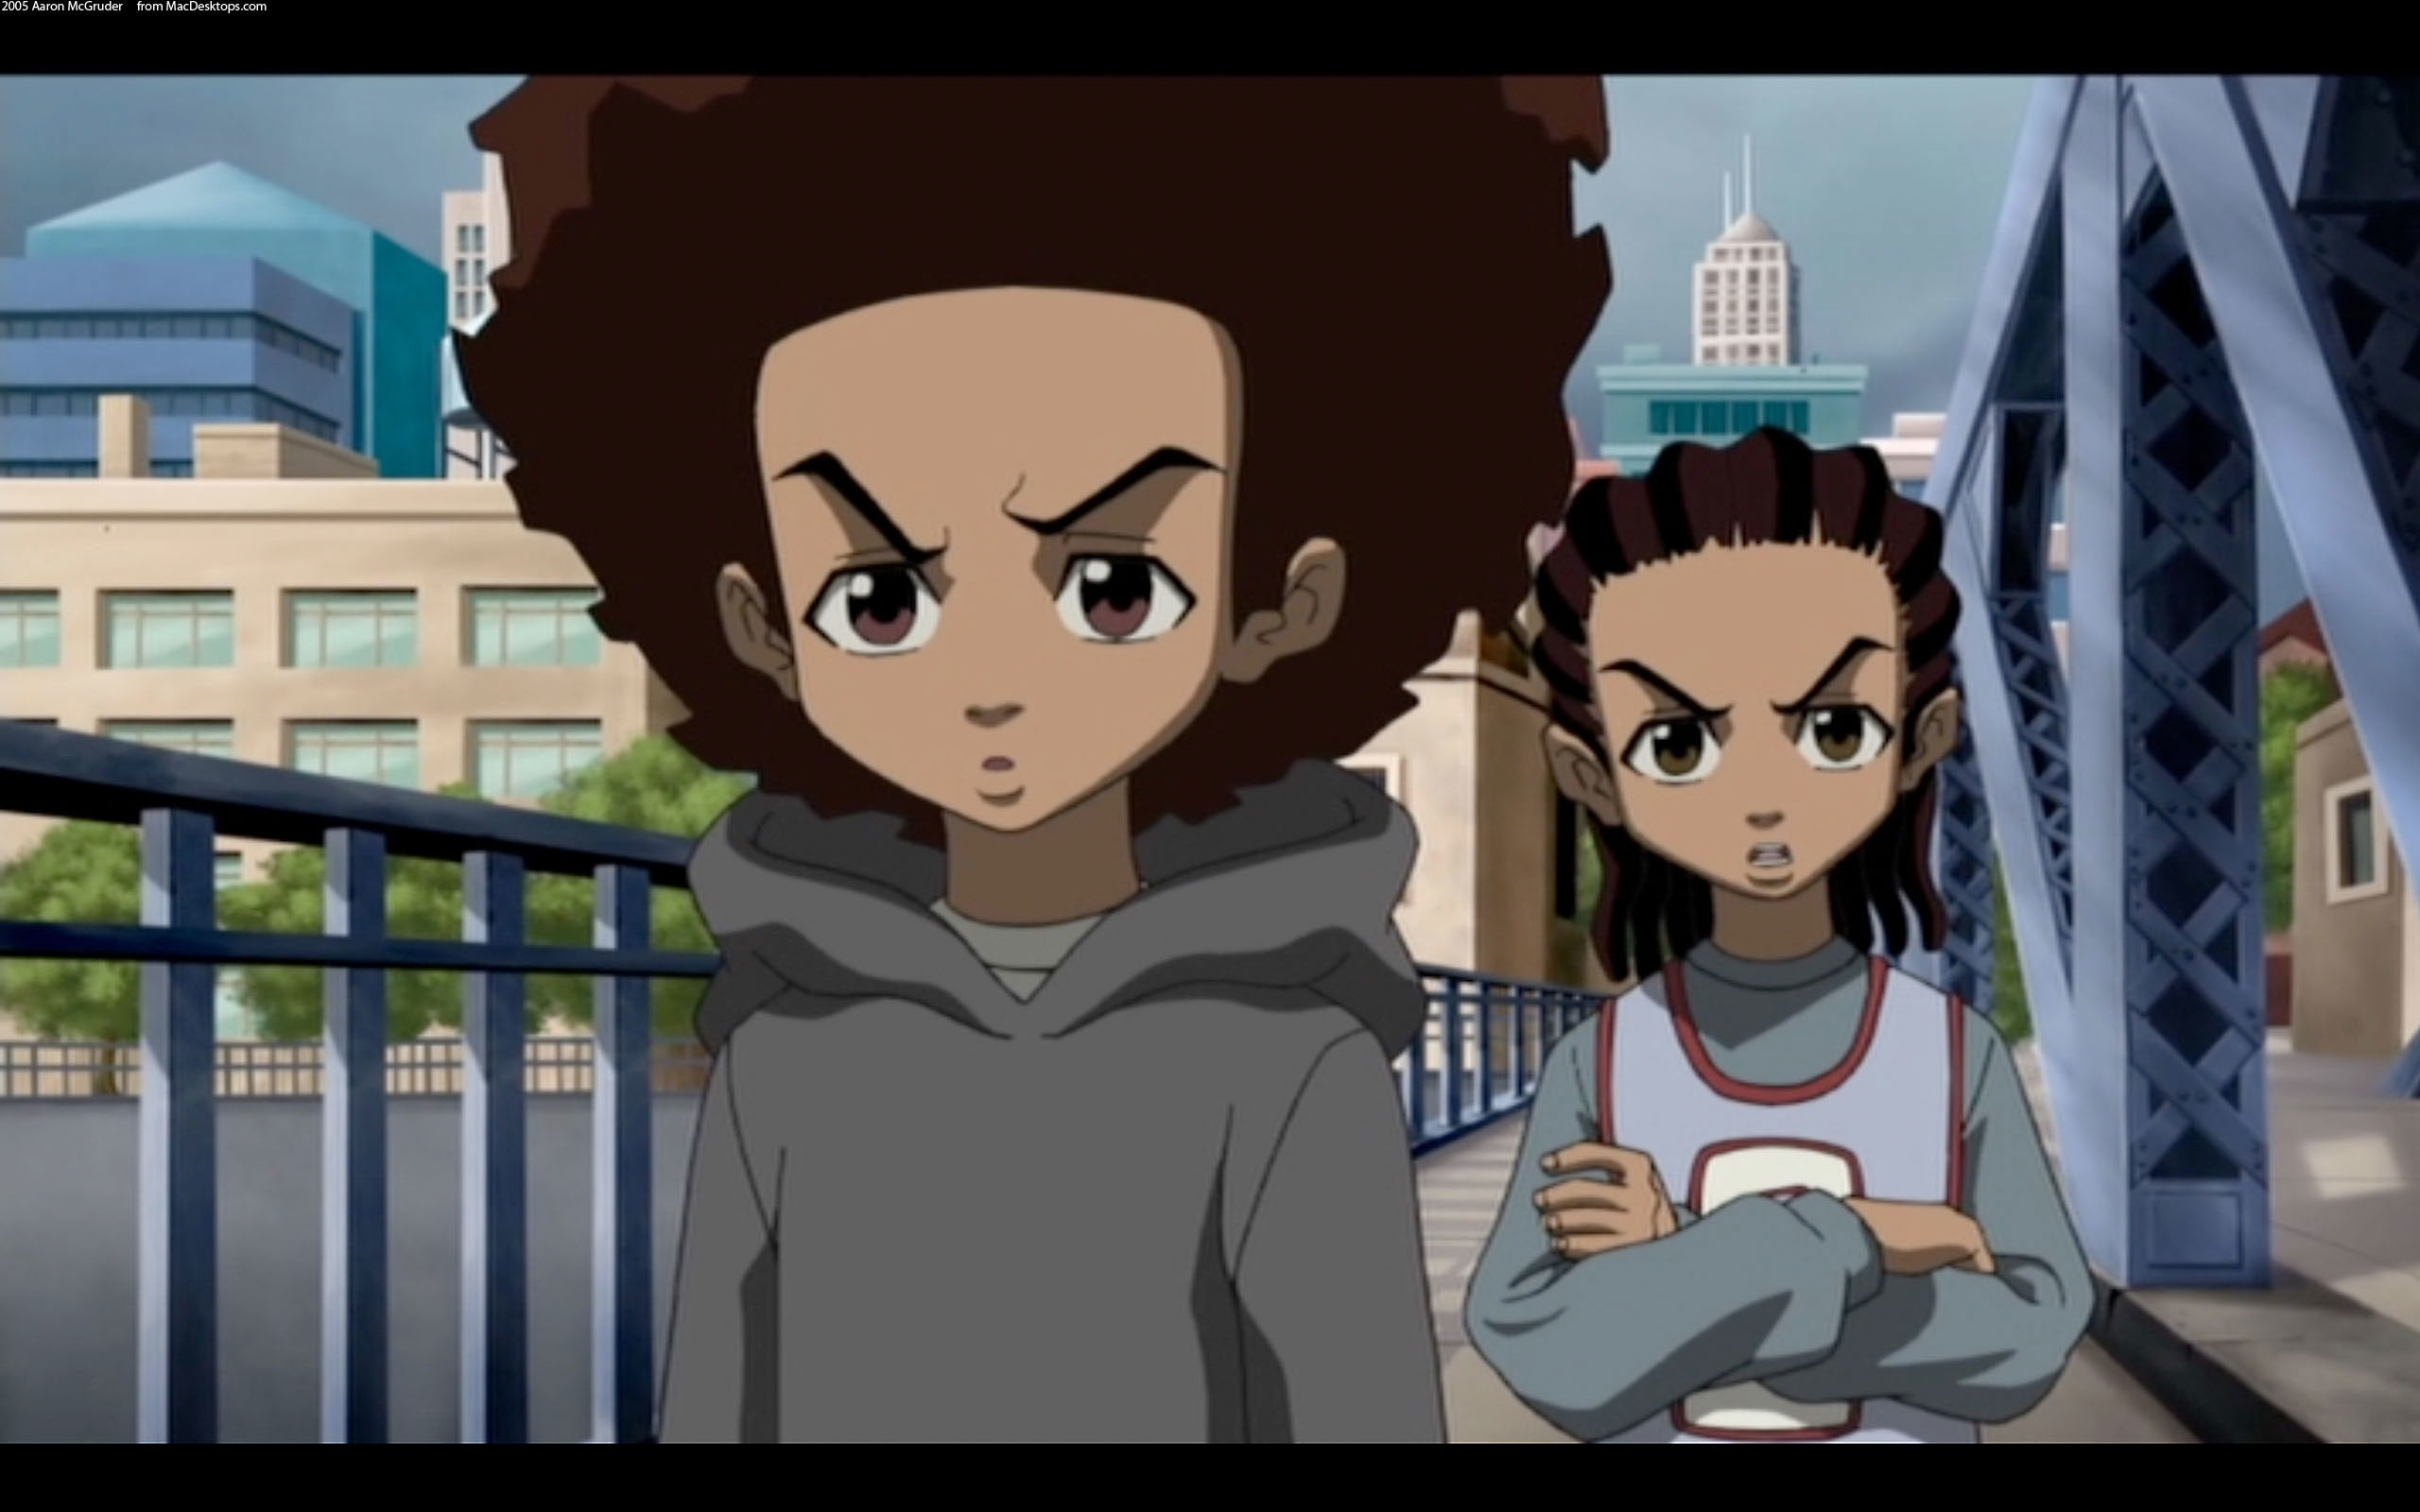 2560x1600 The Boondocks Images | Crazy Gallery